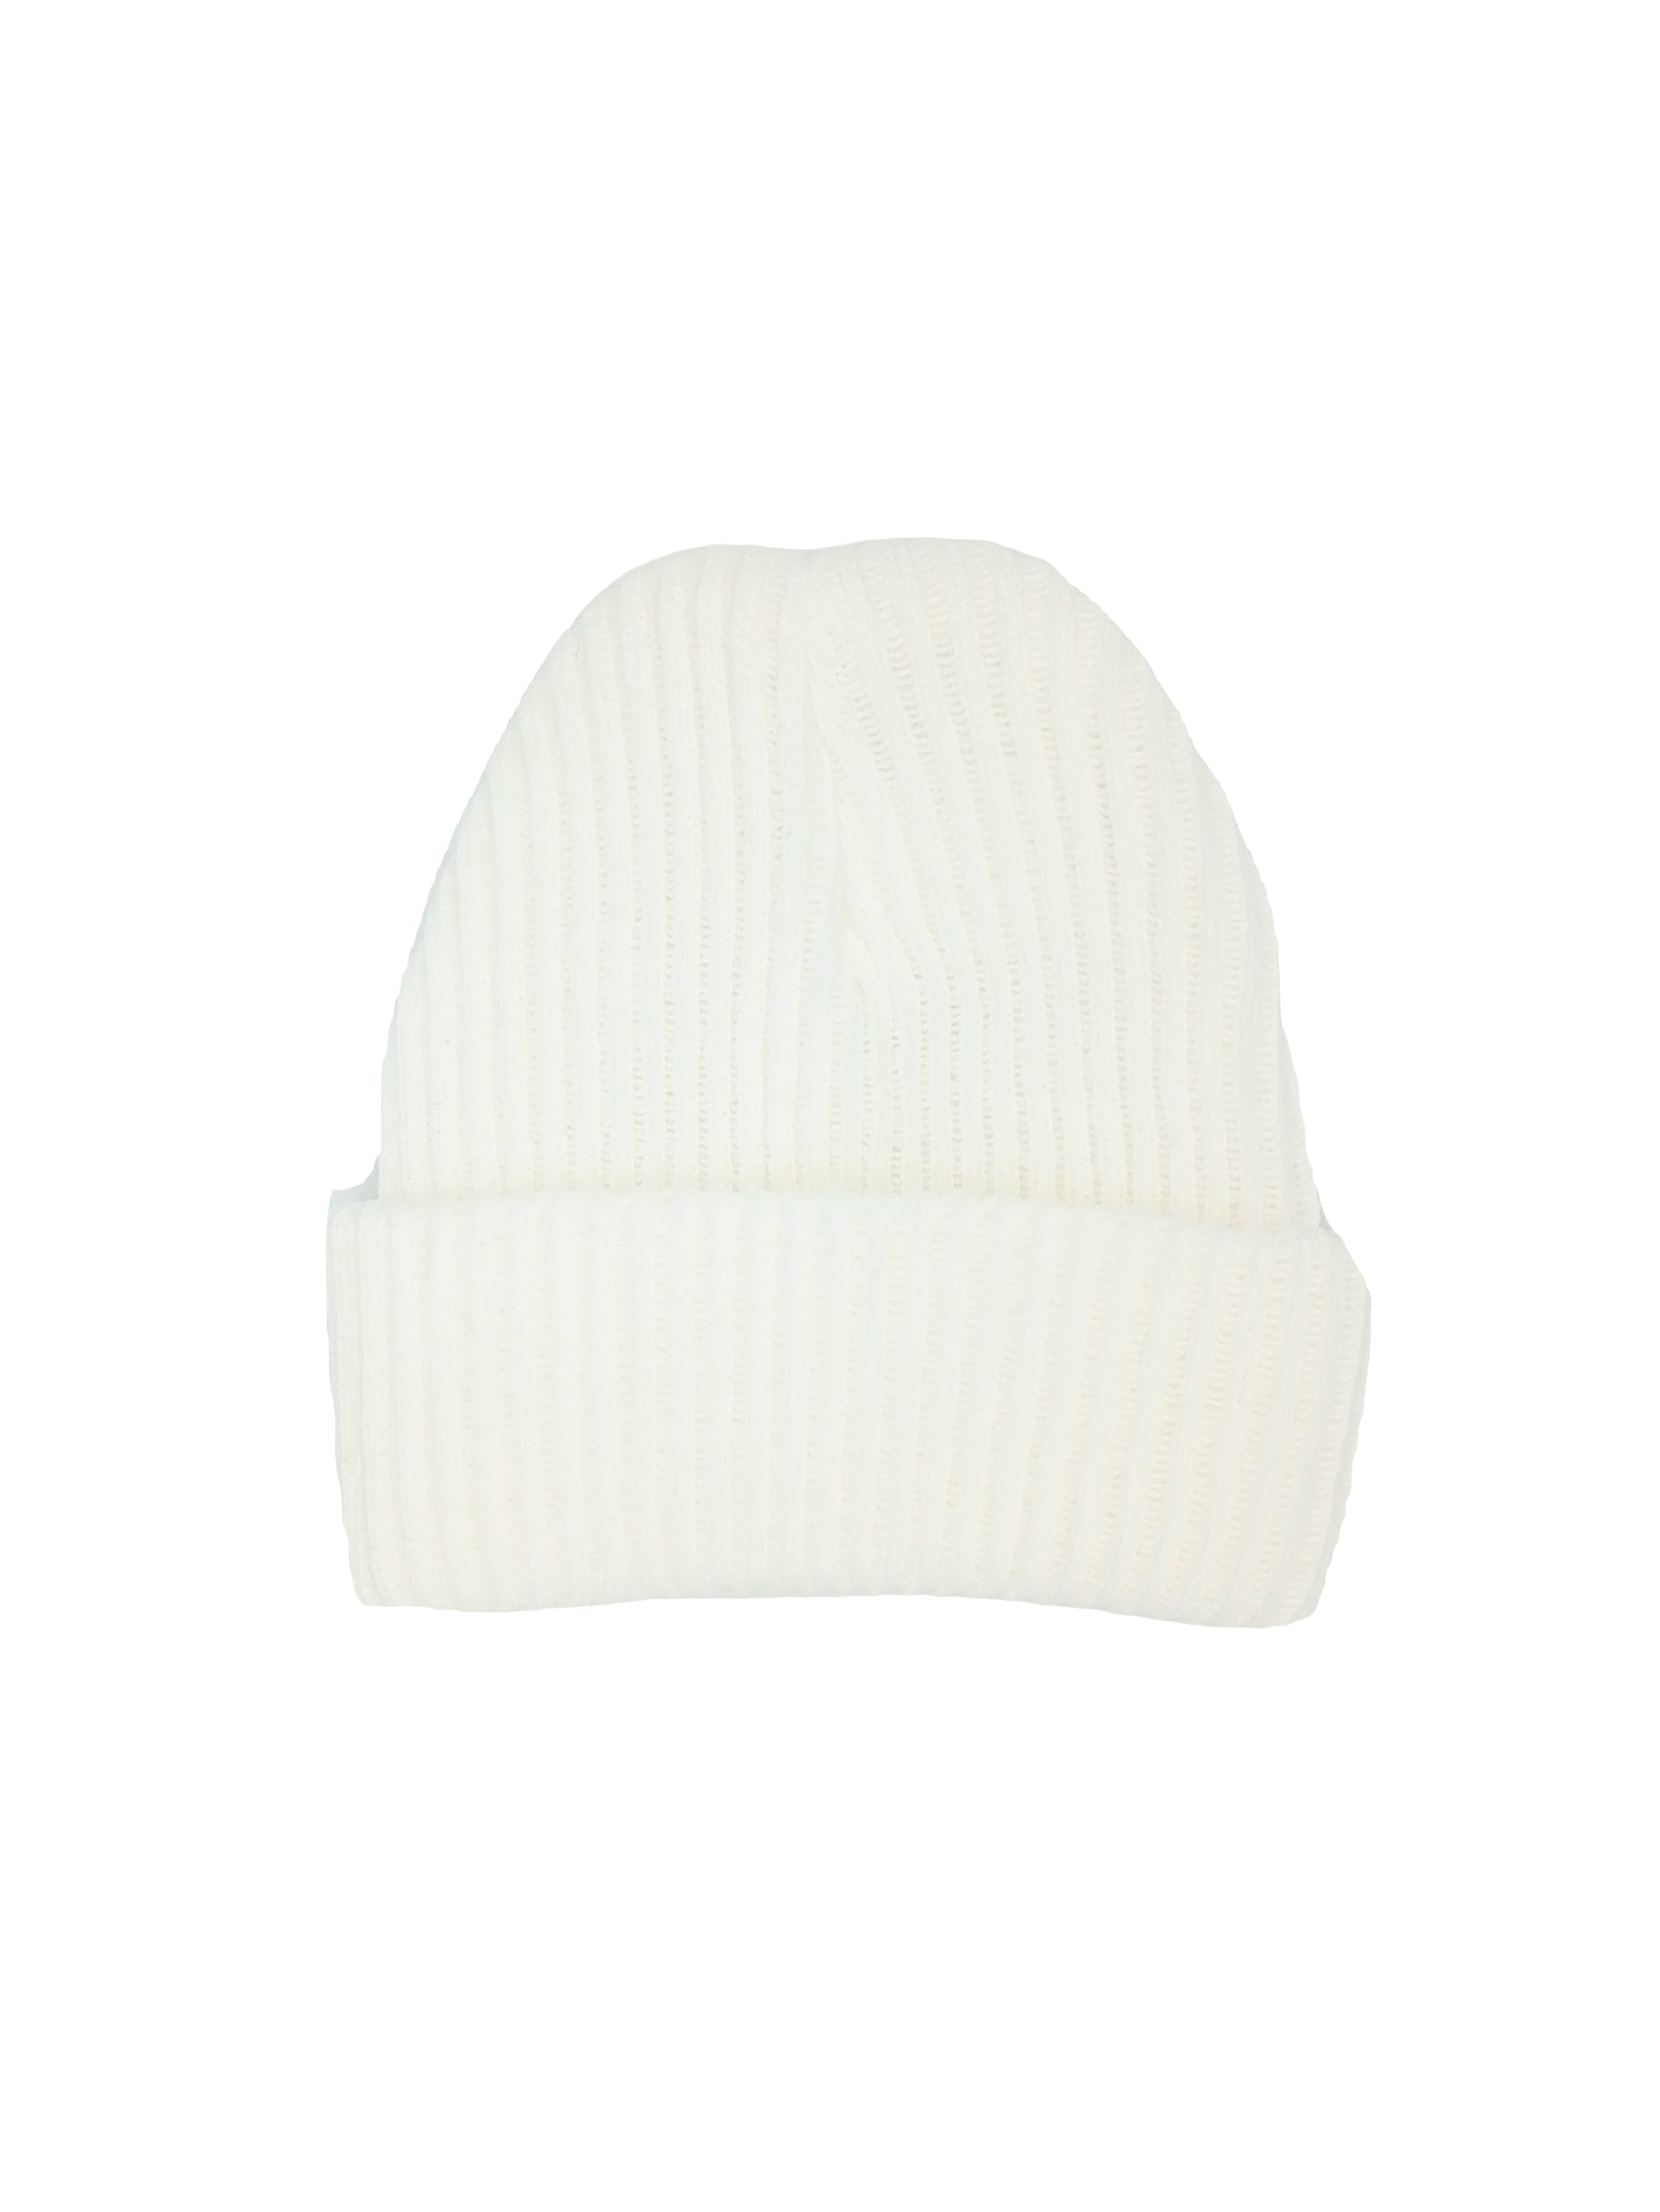 Premature Baby White Knitted Hat 4-8lb - Hat - Little Mouse Baby Clothing and Gifts Ltd